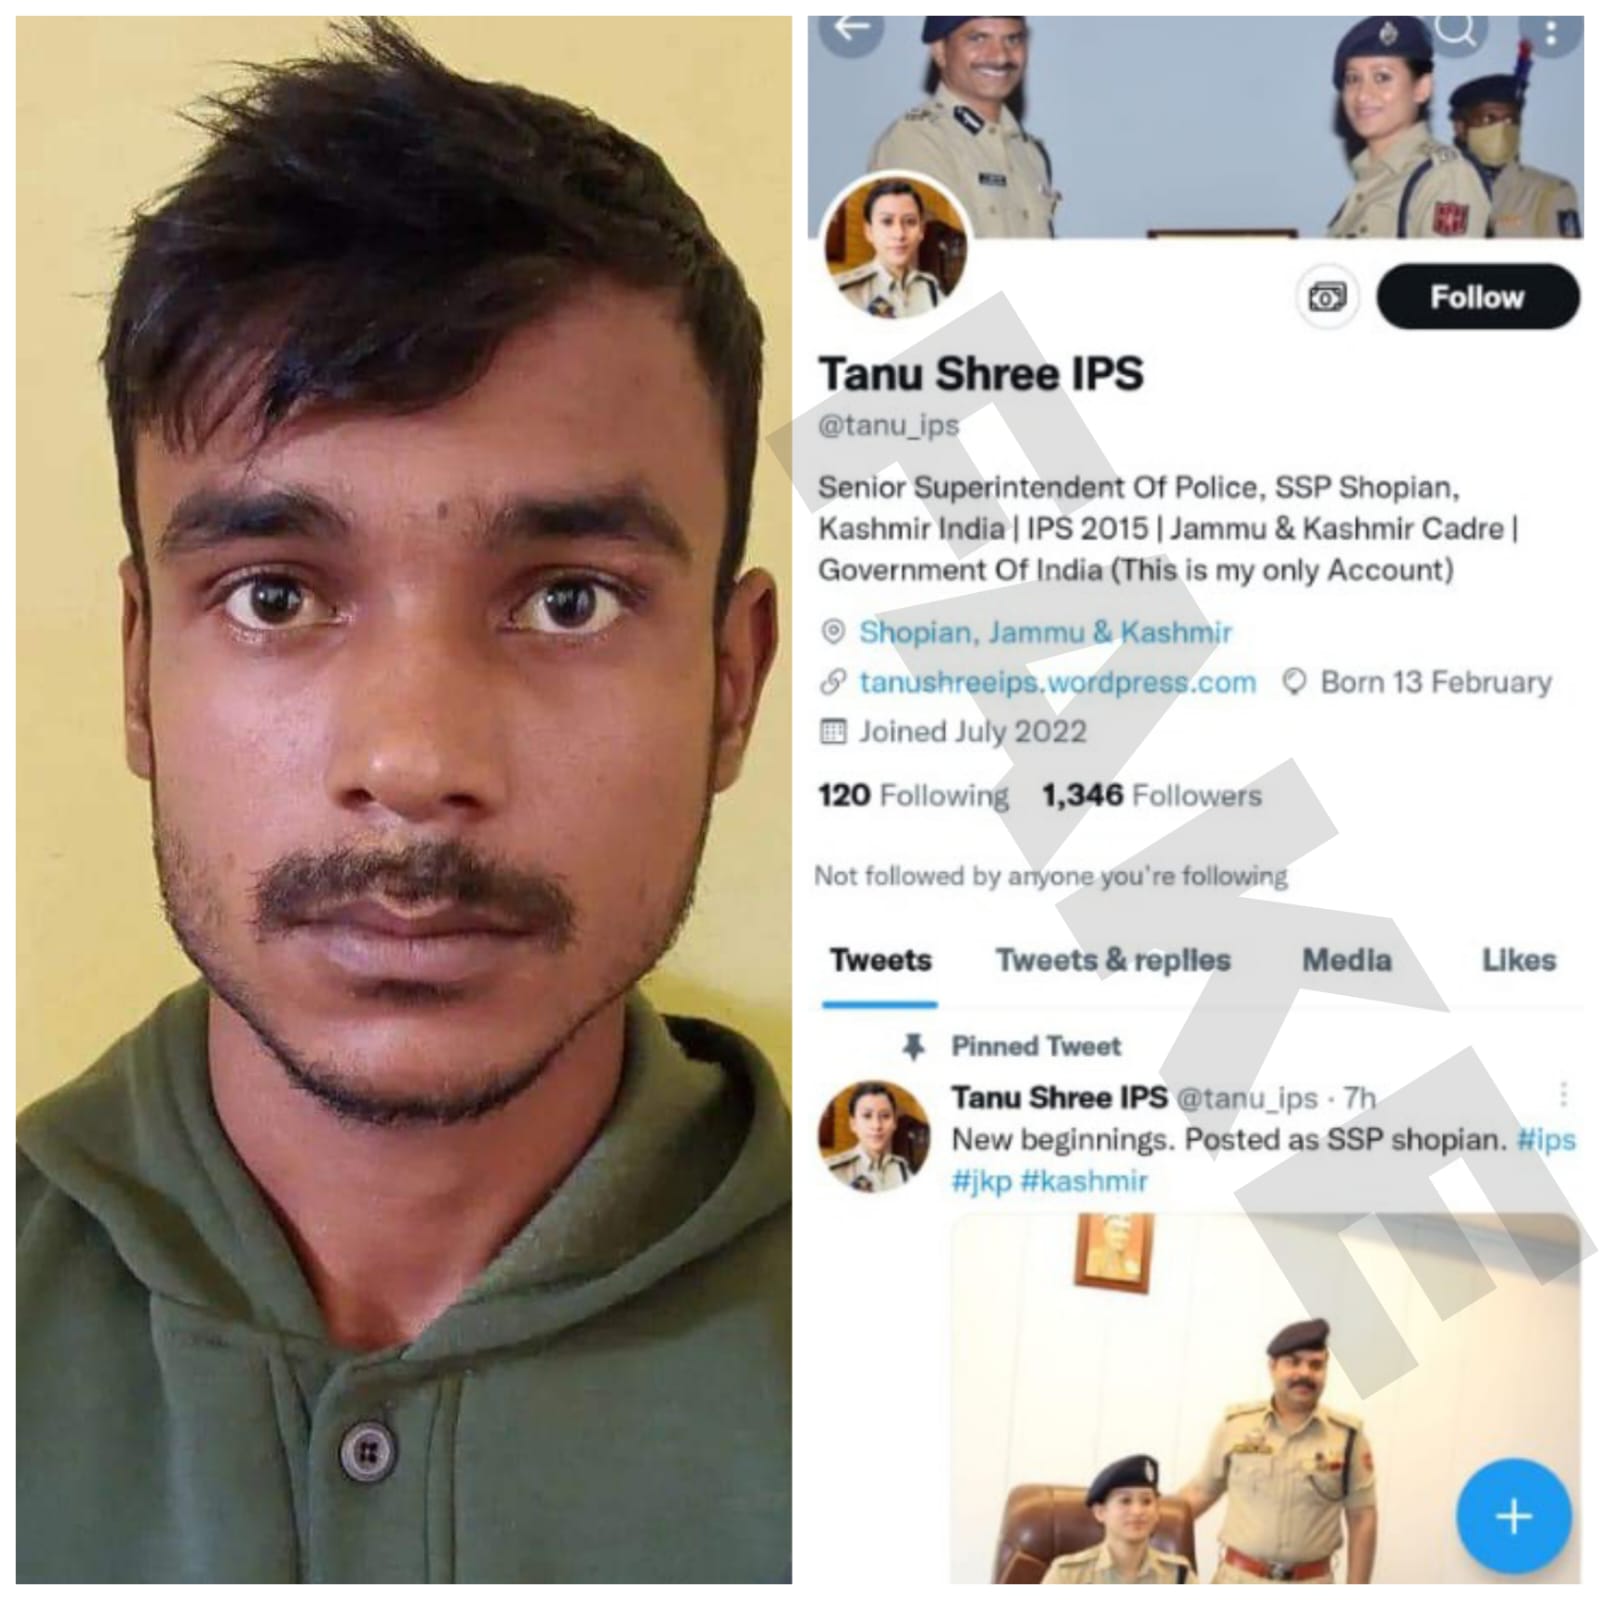 'Man using Fake Twitter Handle of SSP Shopian arrested in UP: Shopian Police'